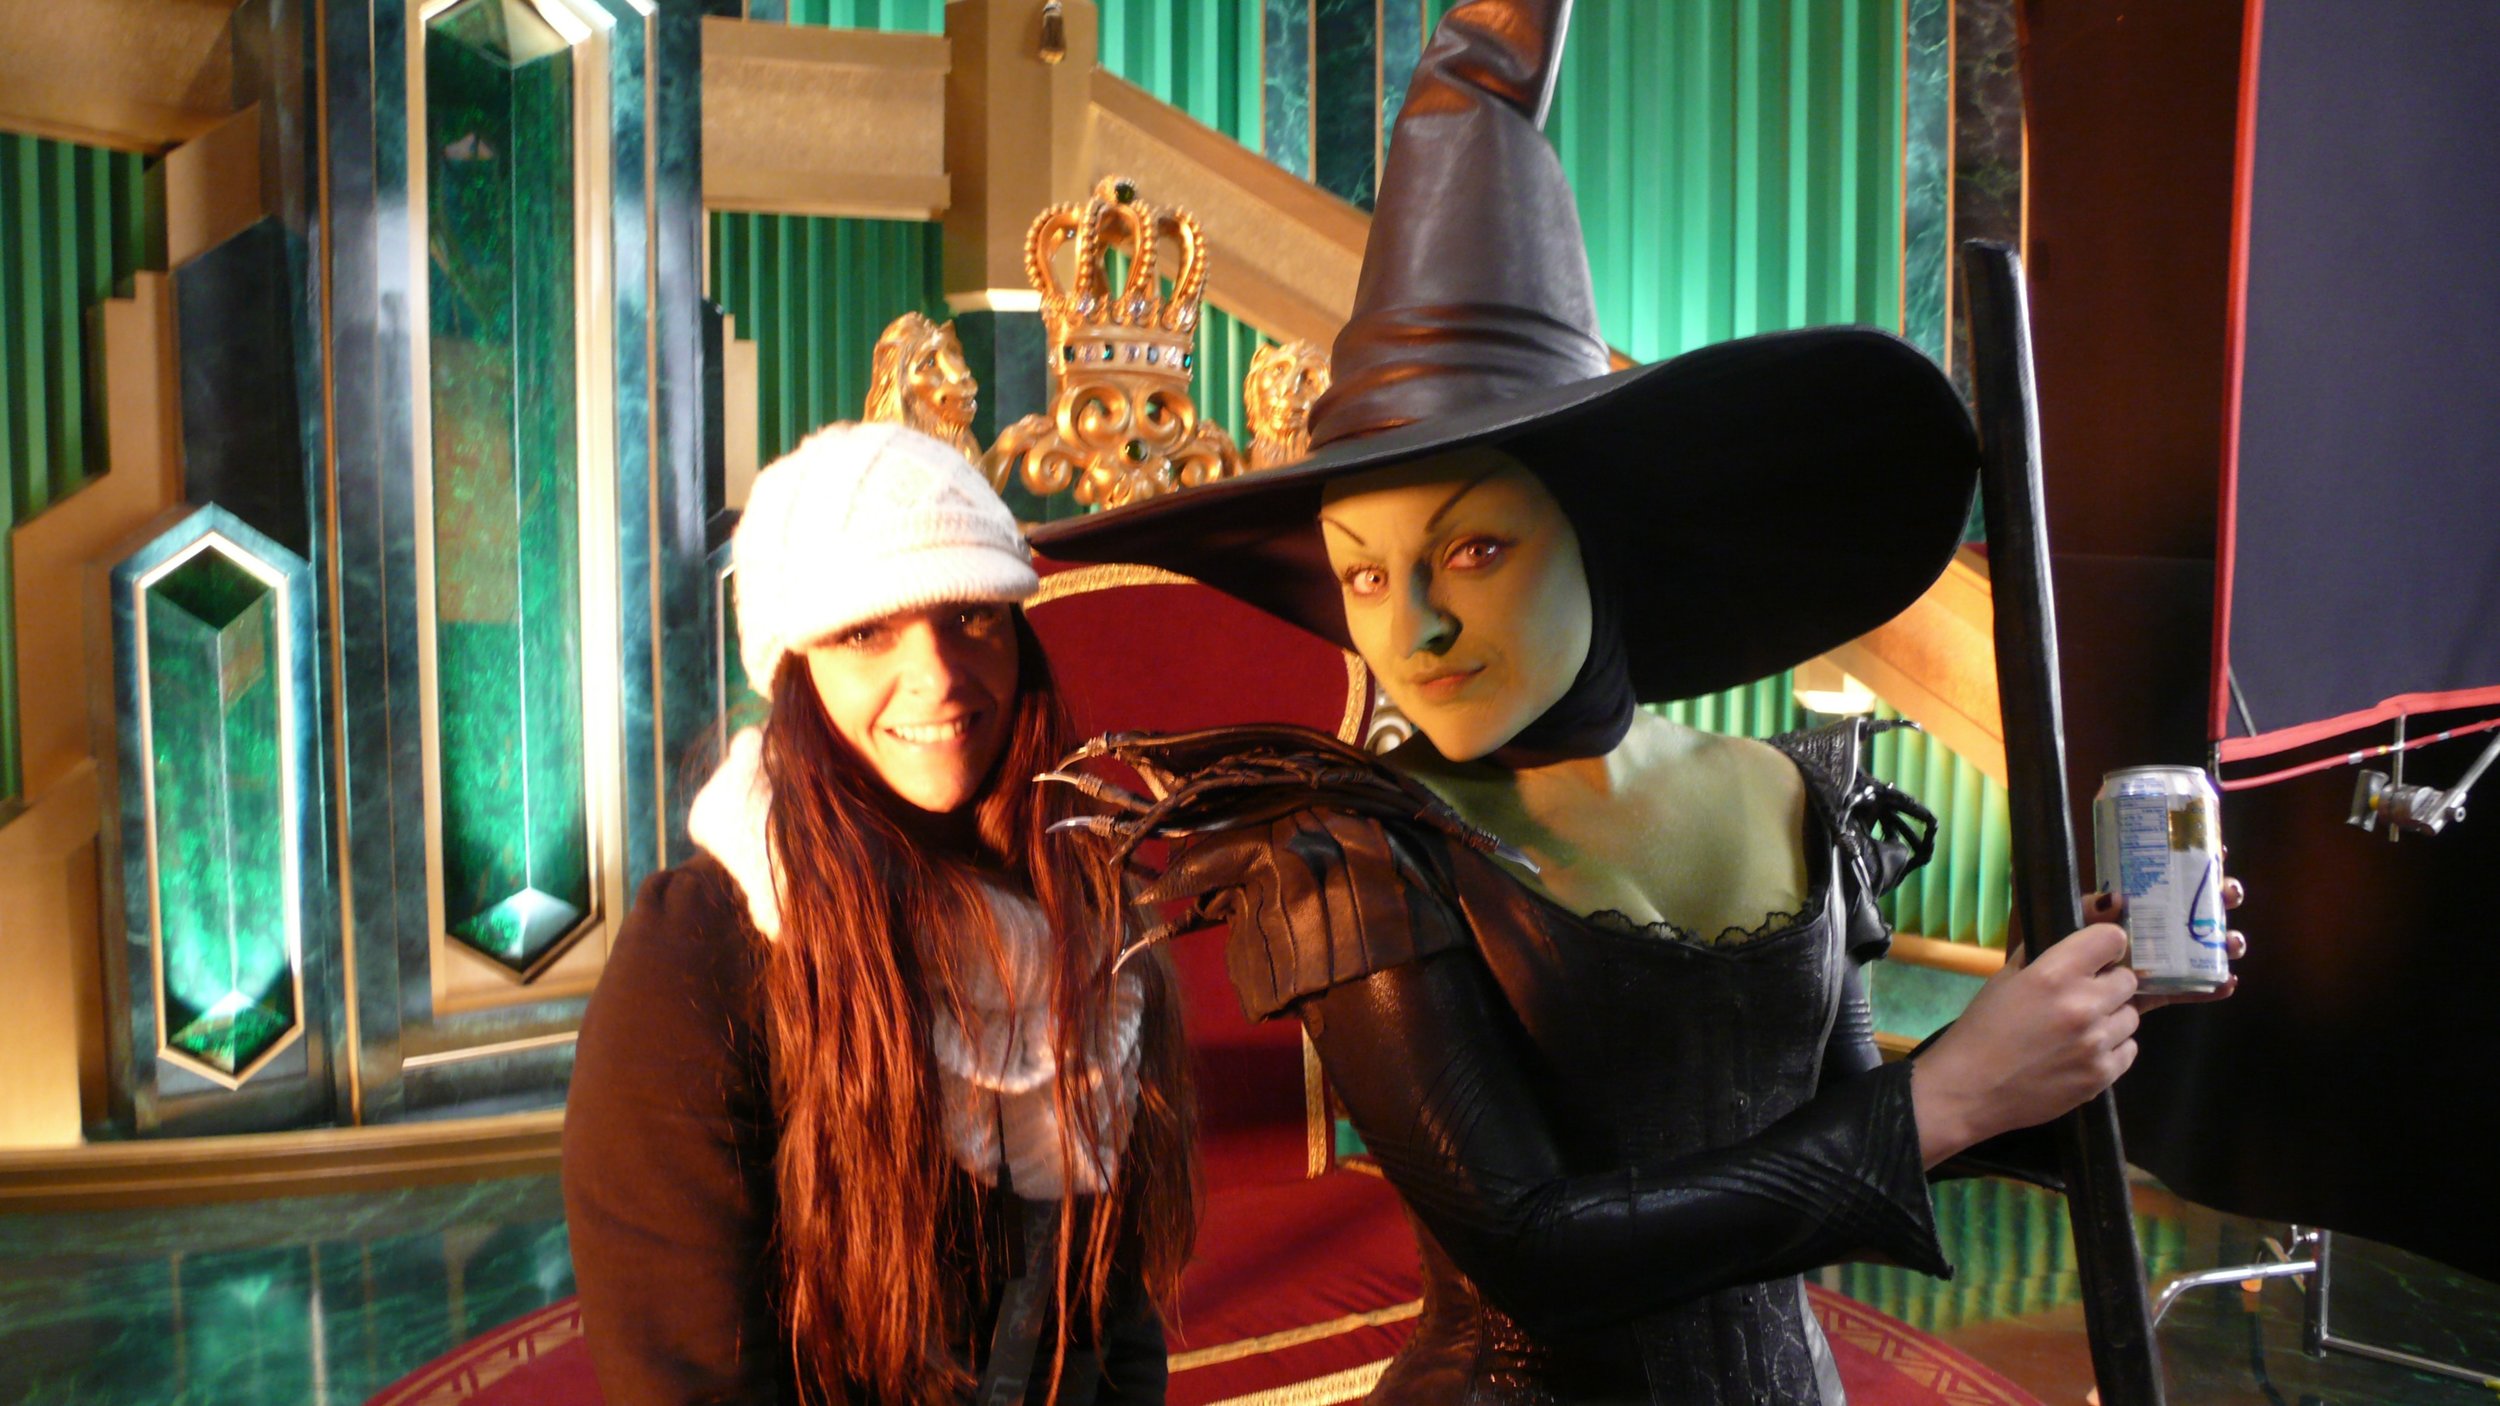 Mila Kunis costumer on the movie Oz The Great and Powerful